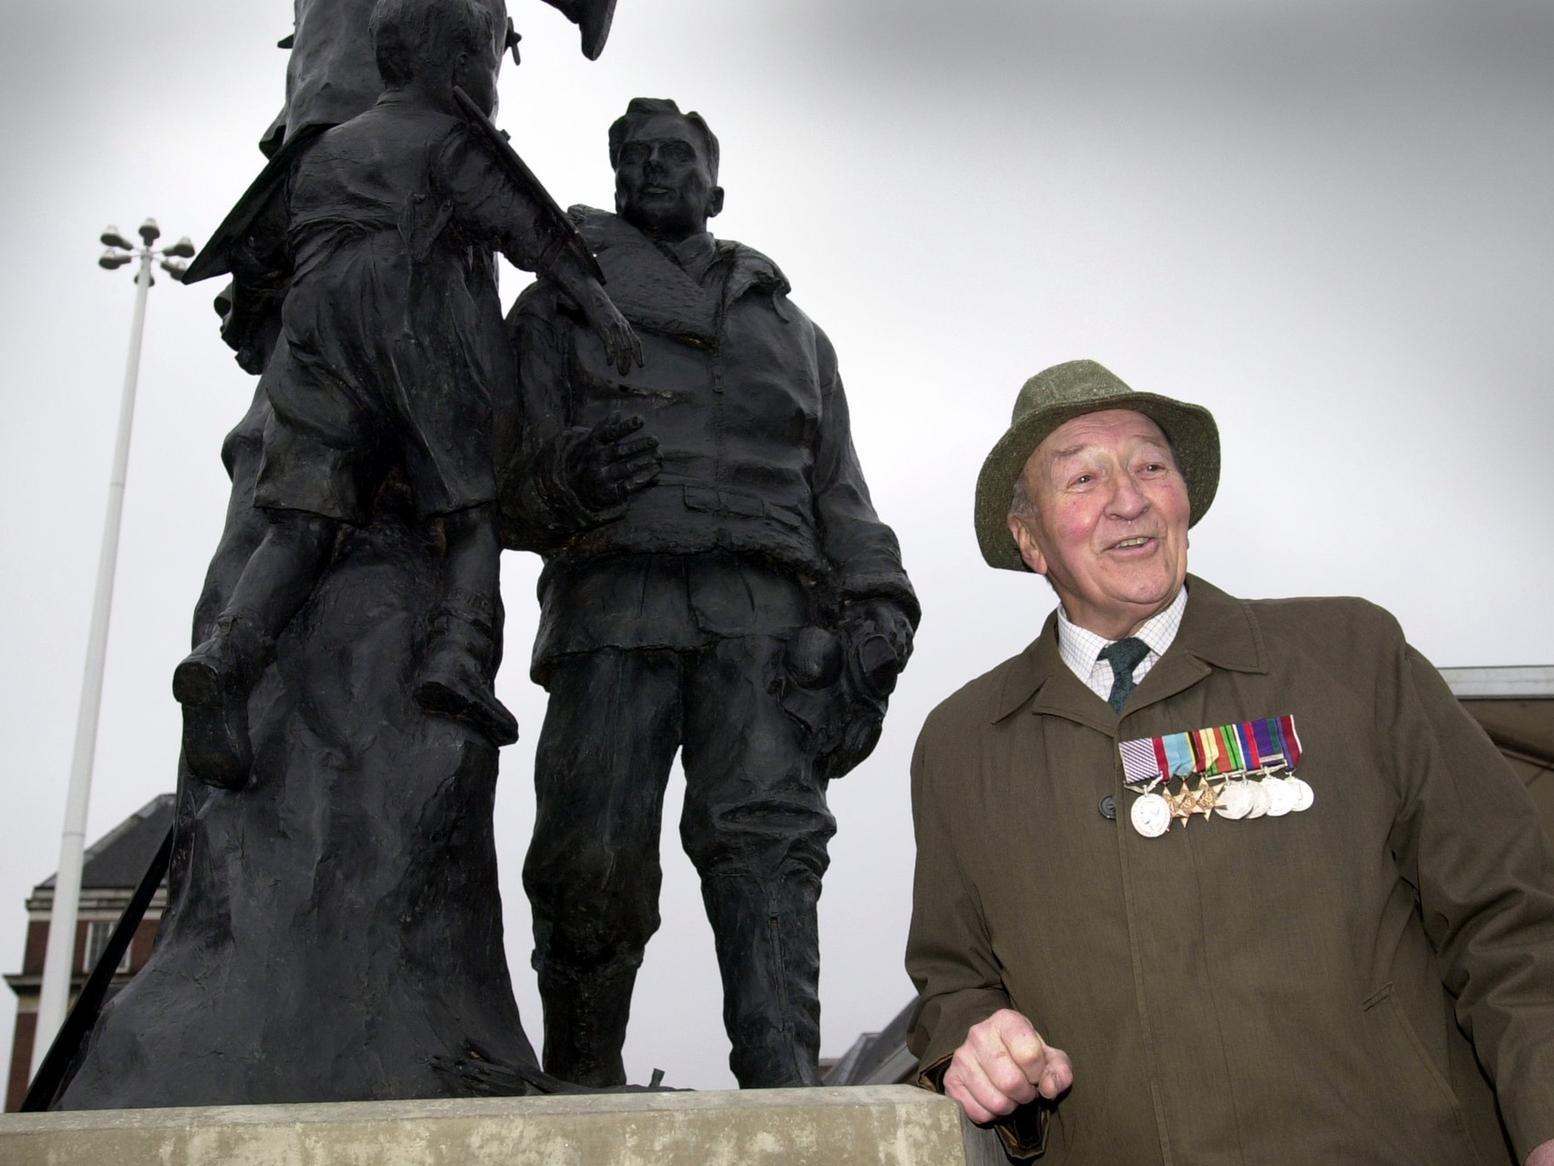 A statue of Arthur Aaron VC who died heroically during WW2 was unveiled in Leeds. Pictured is Malcolm Mitchem DFM, the last surviving member of  Aaron's crew. It was sculpted by Graham Ibbeson and commissioned by Leeds Civic Trust.